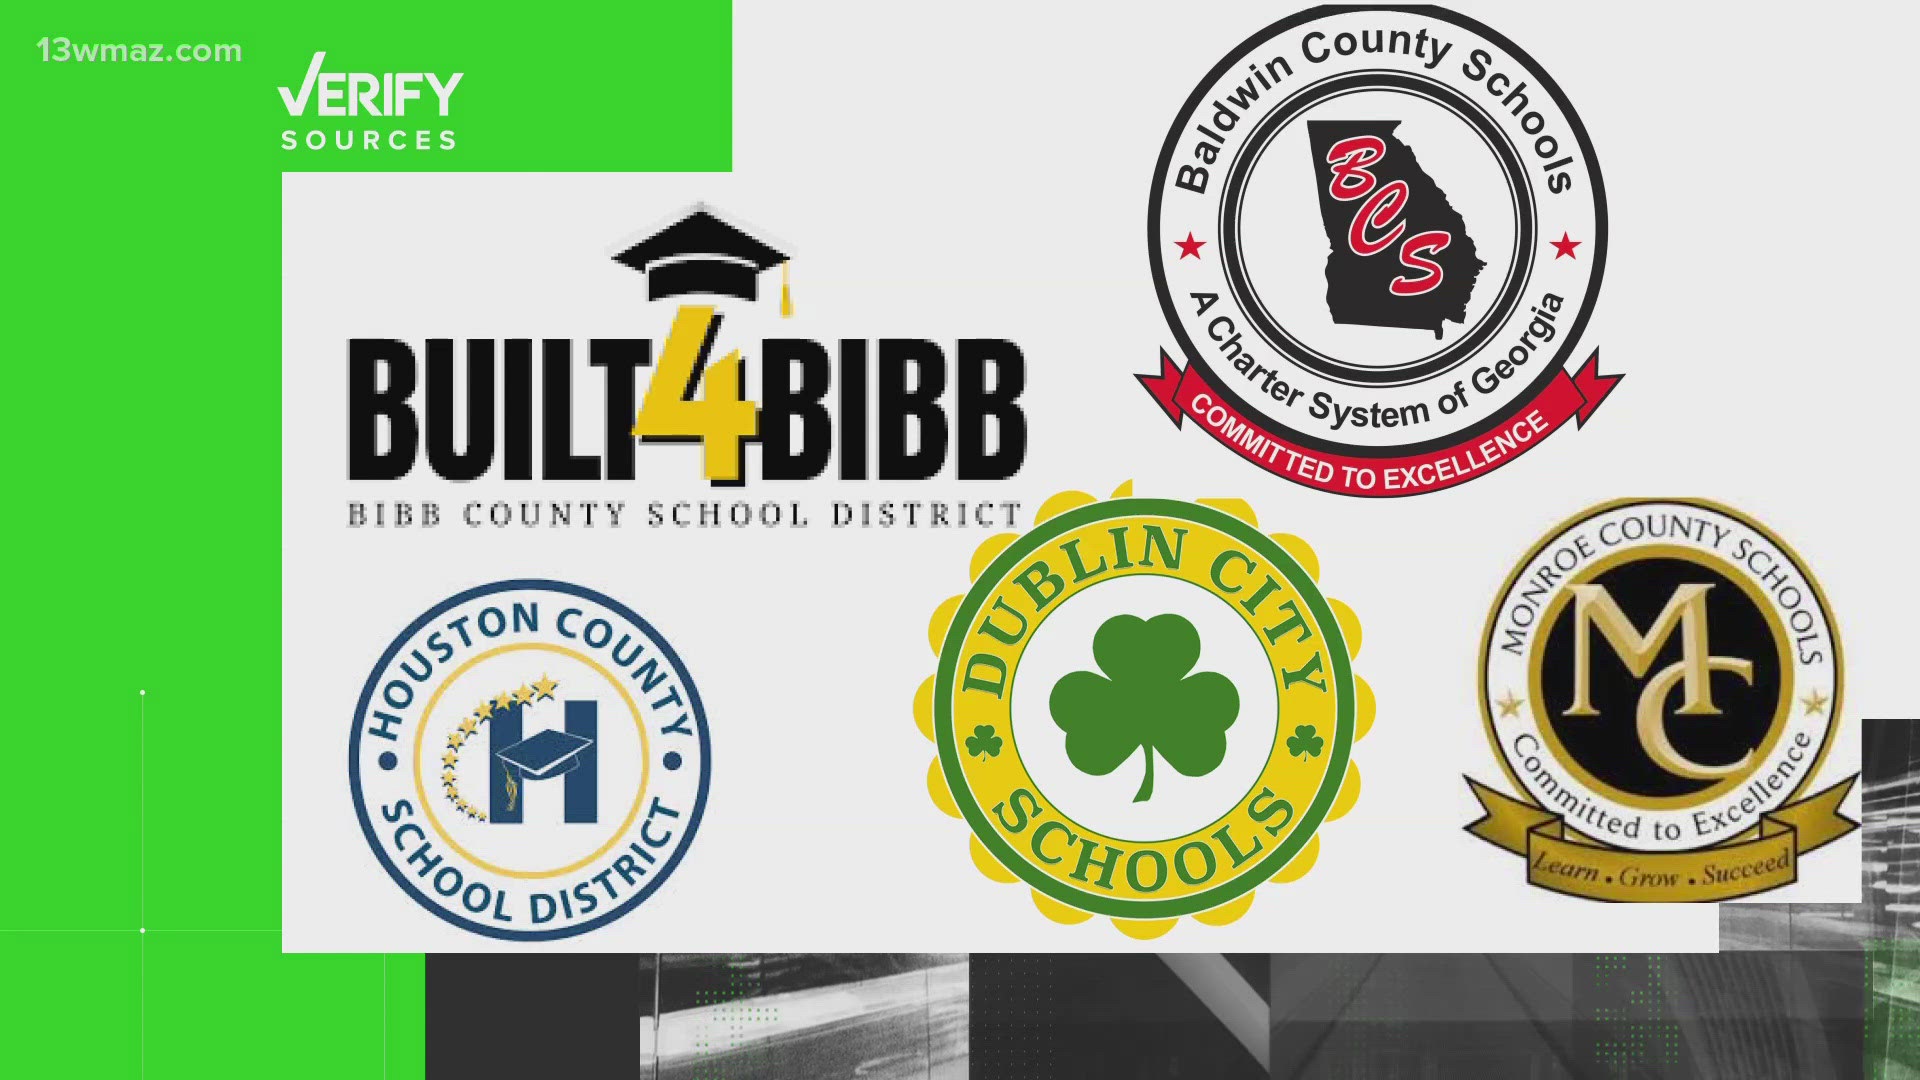 We VERIFY whether or not teachers in Bibb County make less than neighboring school districts. Here's what we found